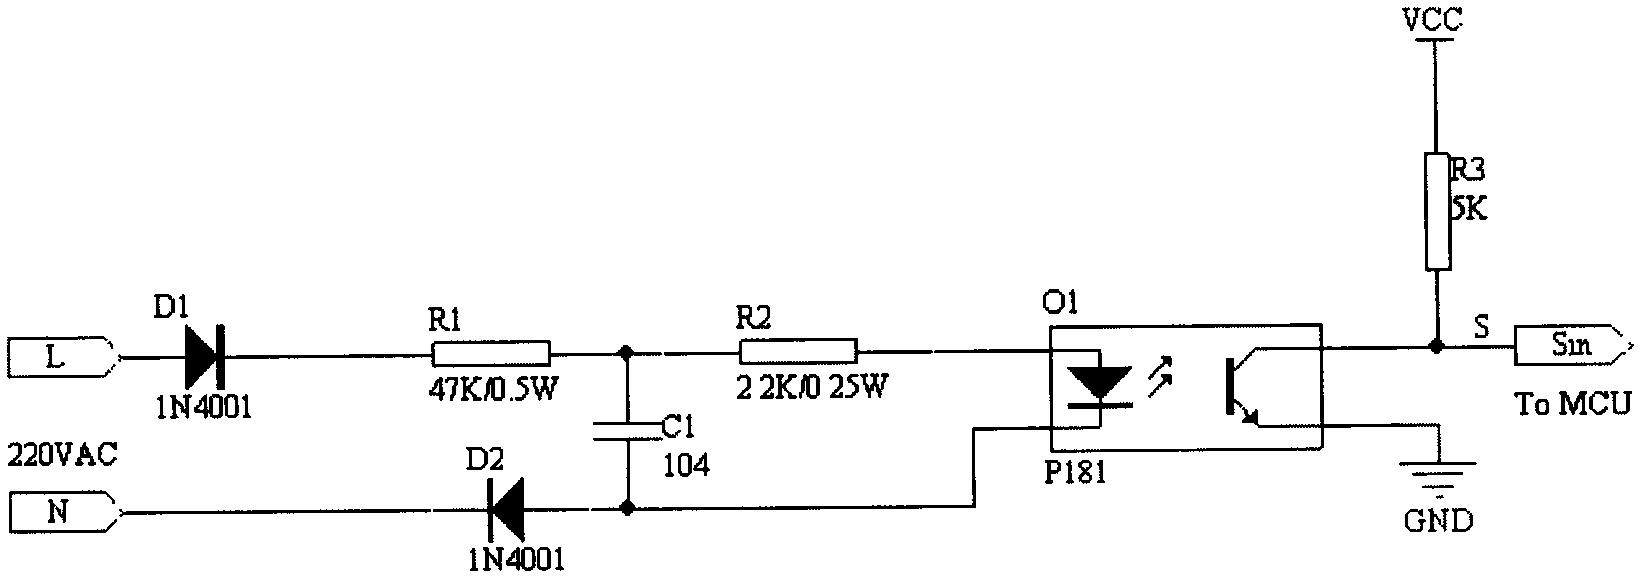 Alternating-current 220V input signal acquisition circuit